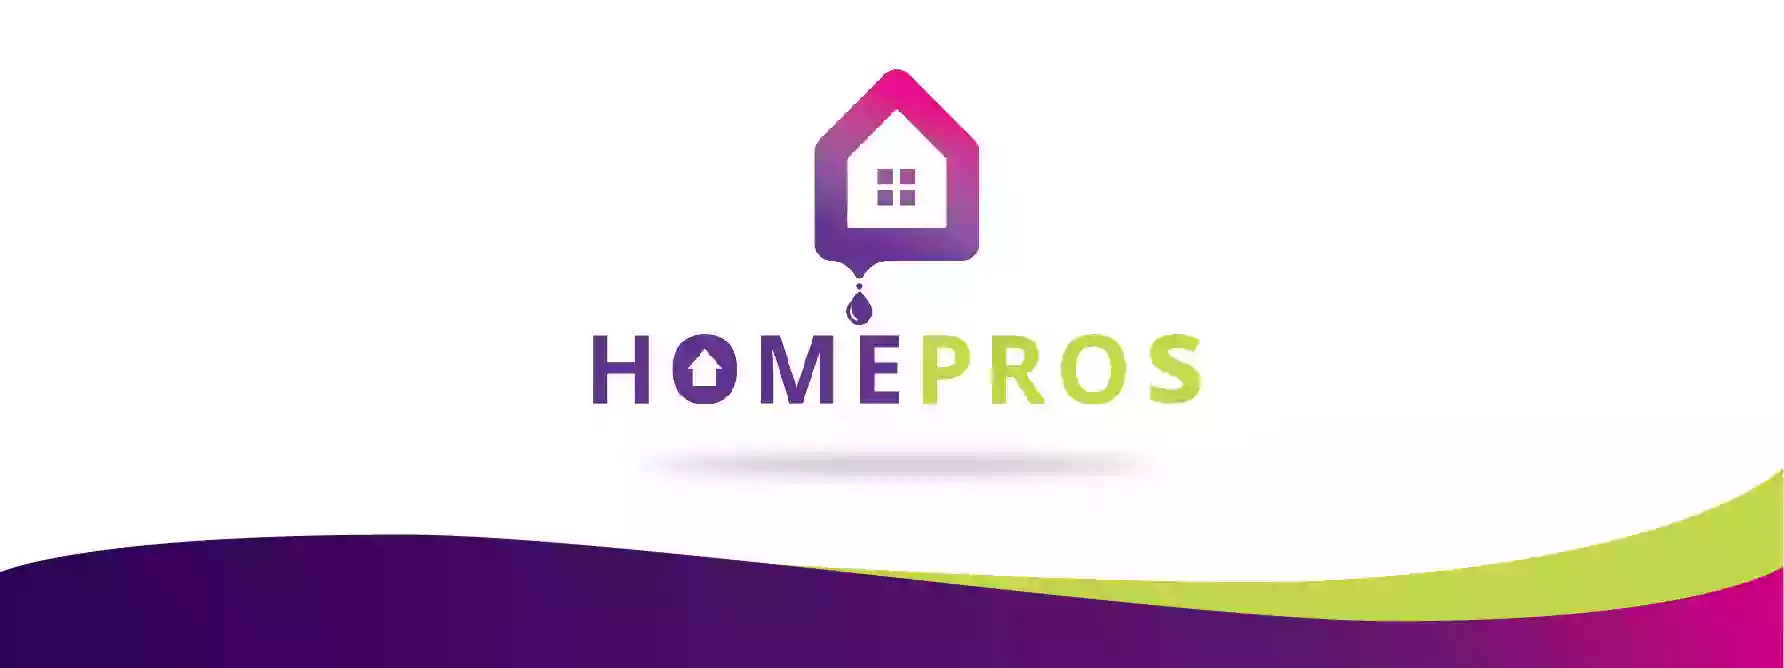 Home Pros Painting and Home Repairs of San Antonio